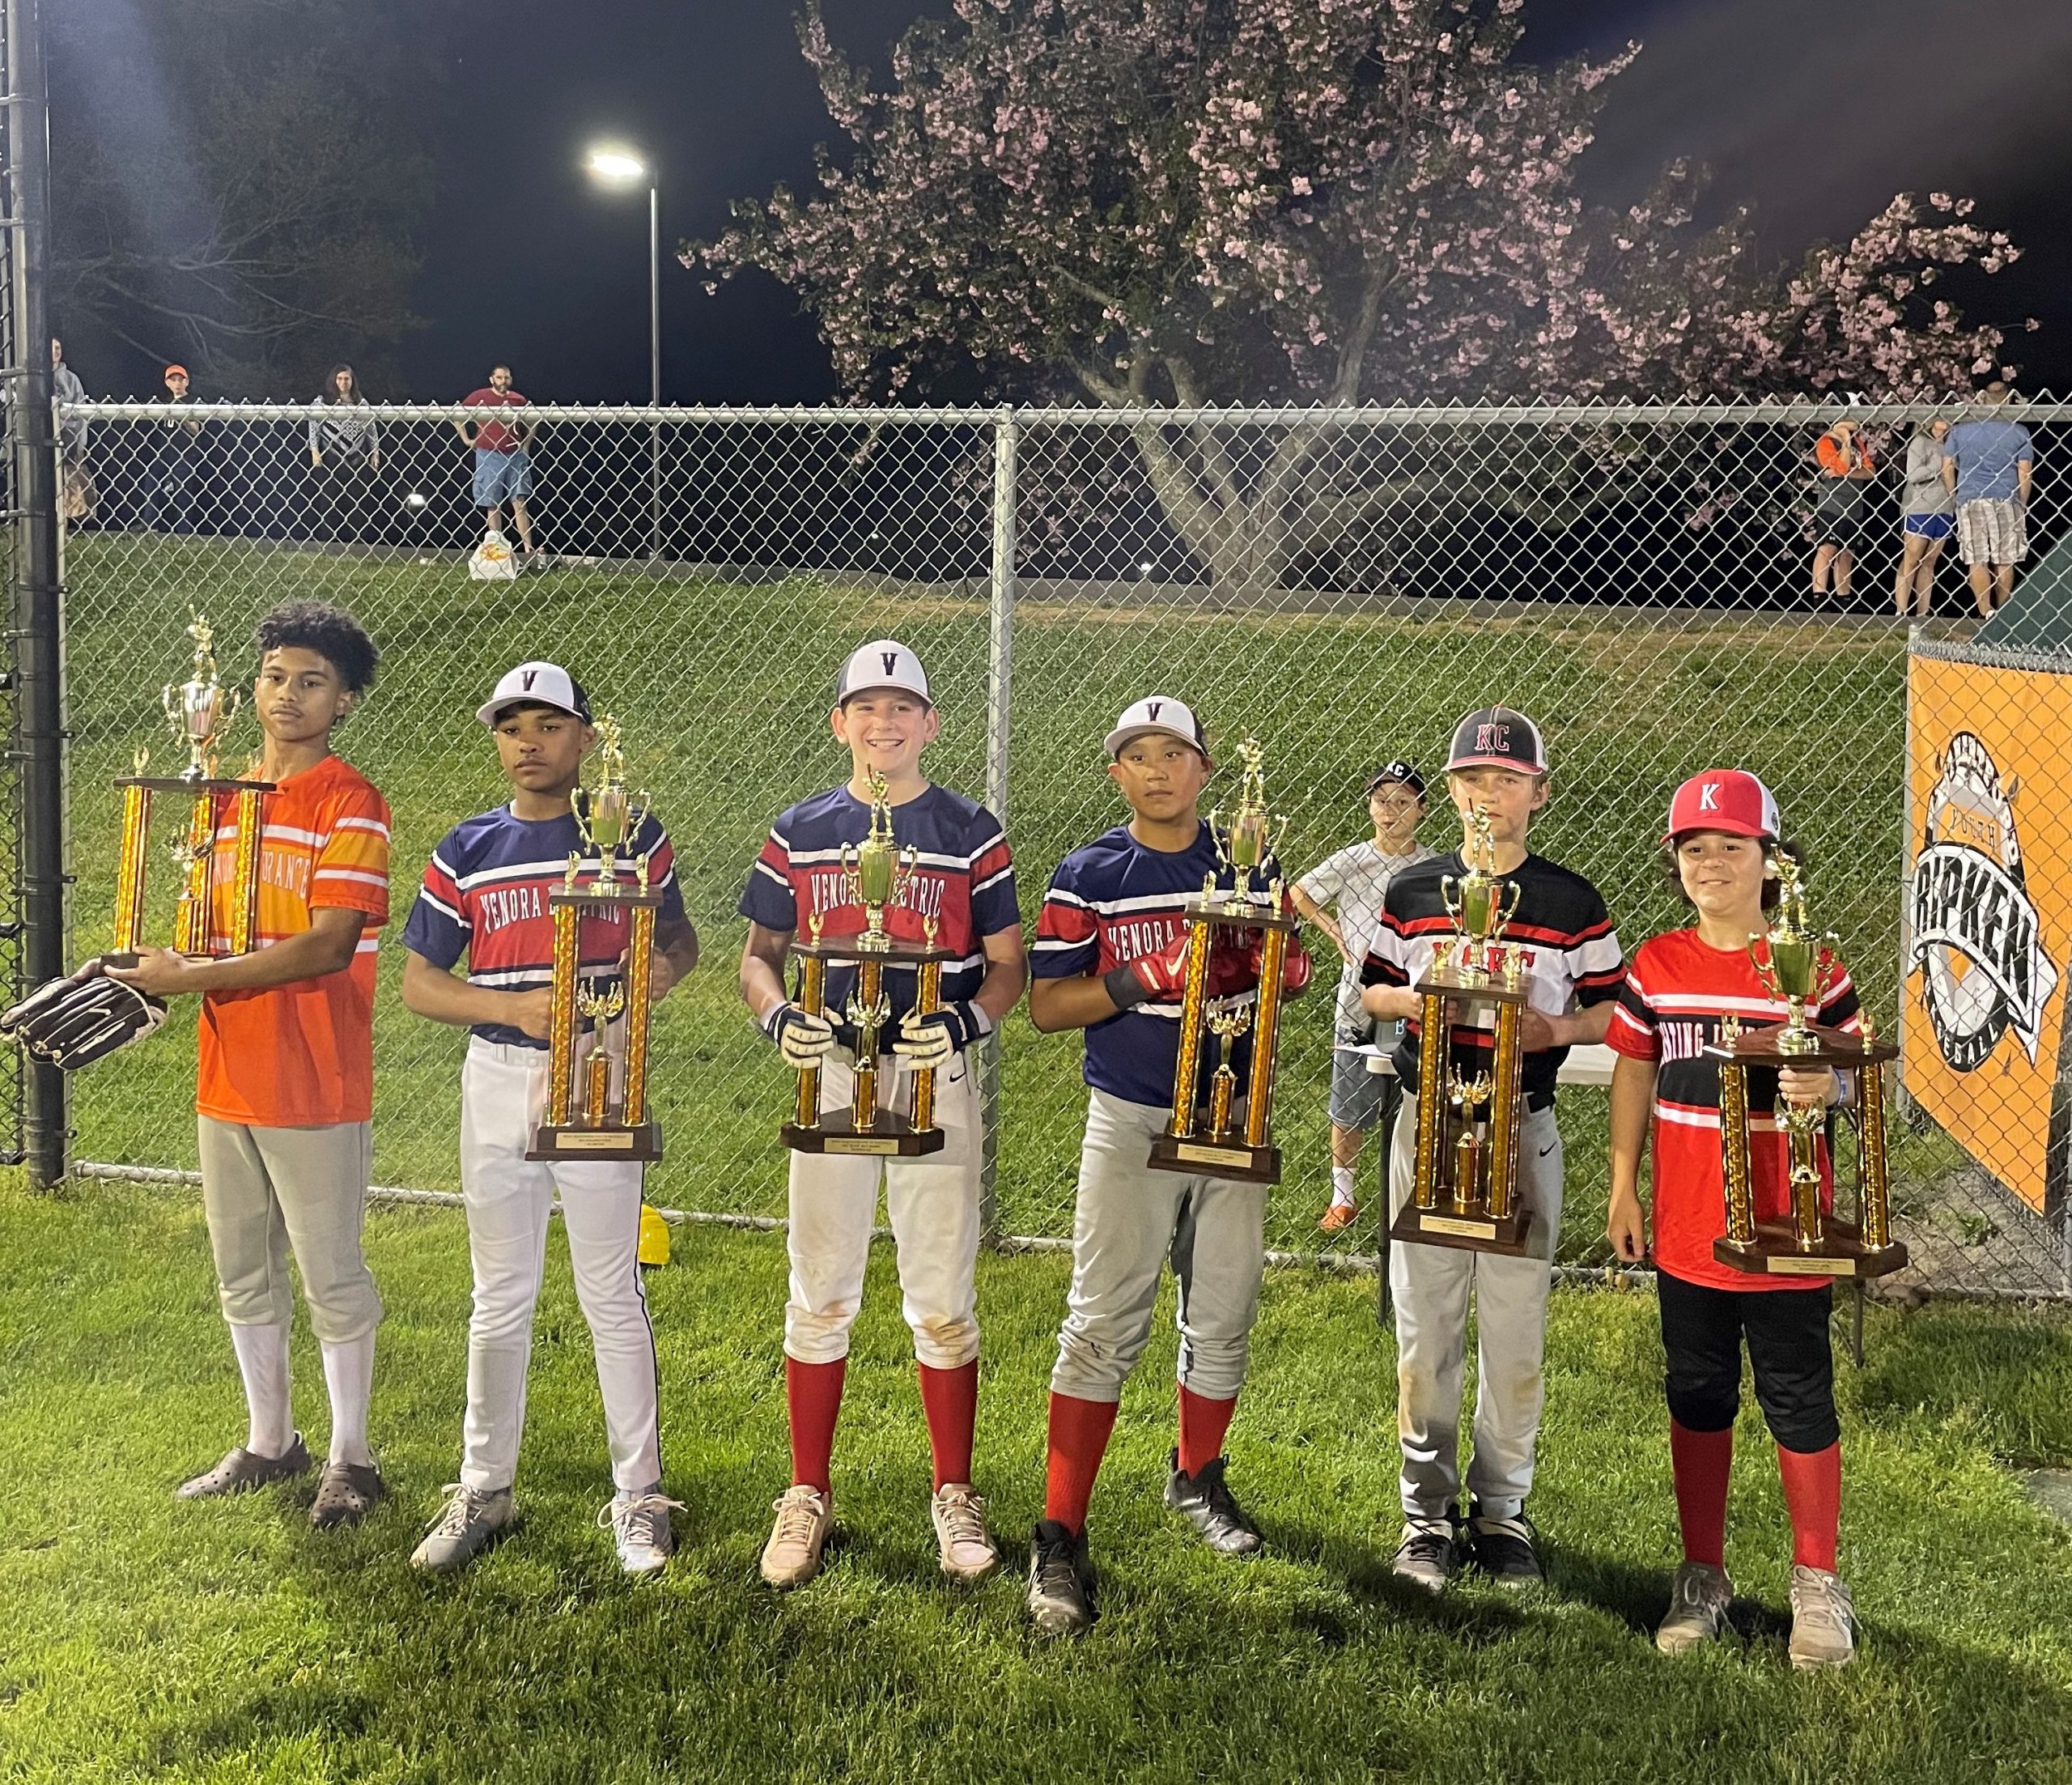 West Hartford Youth Baseball League Holds Annual All Star Weekend - We-Ha